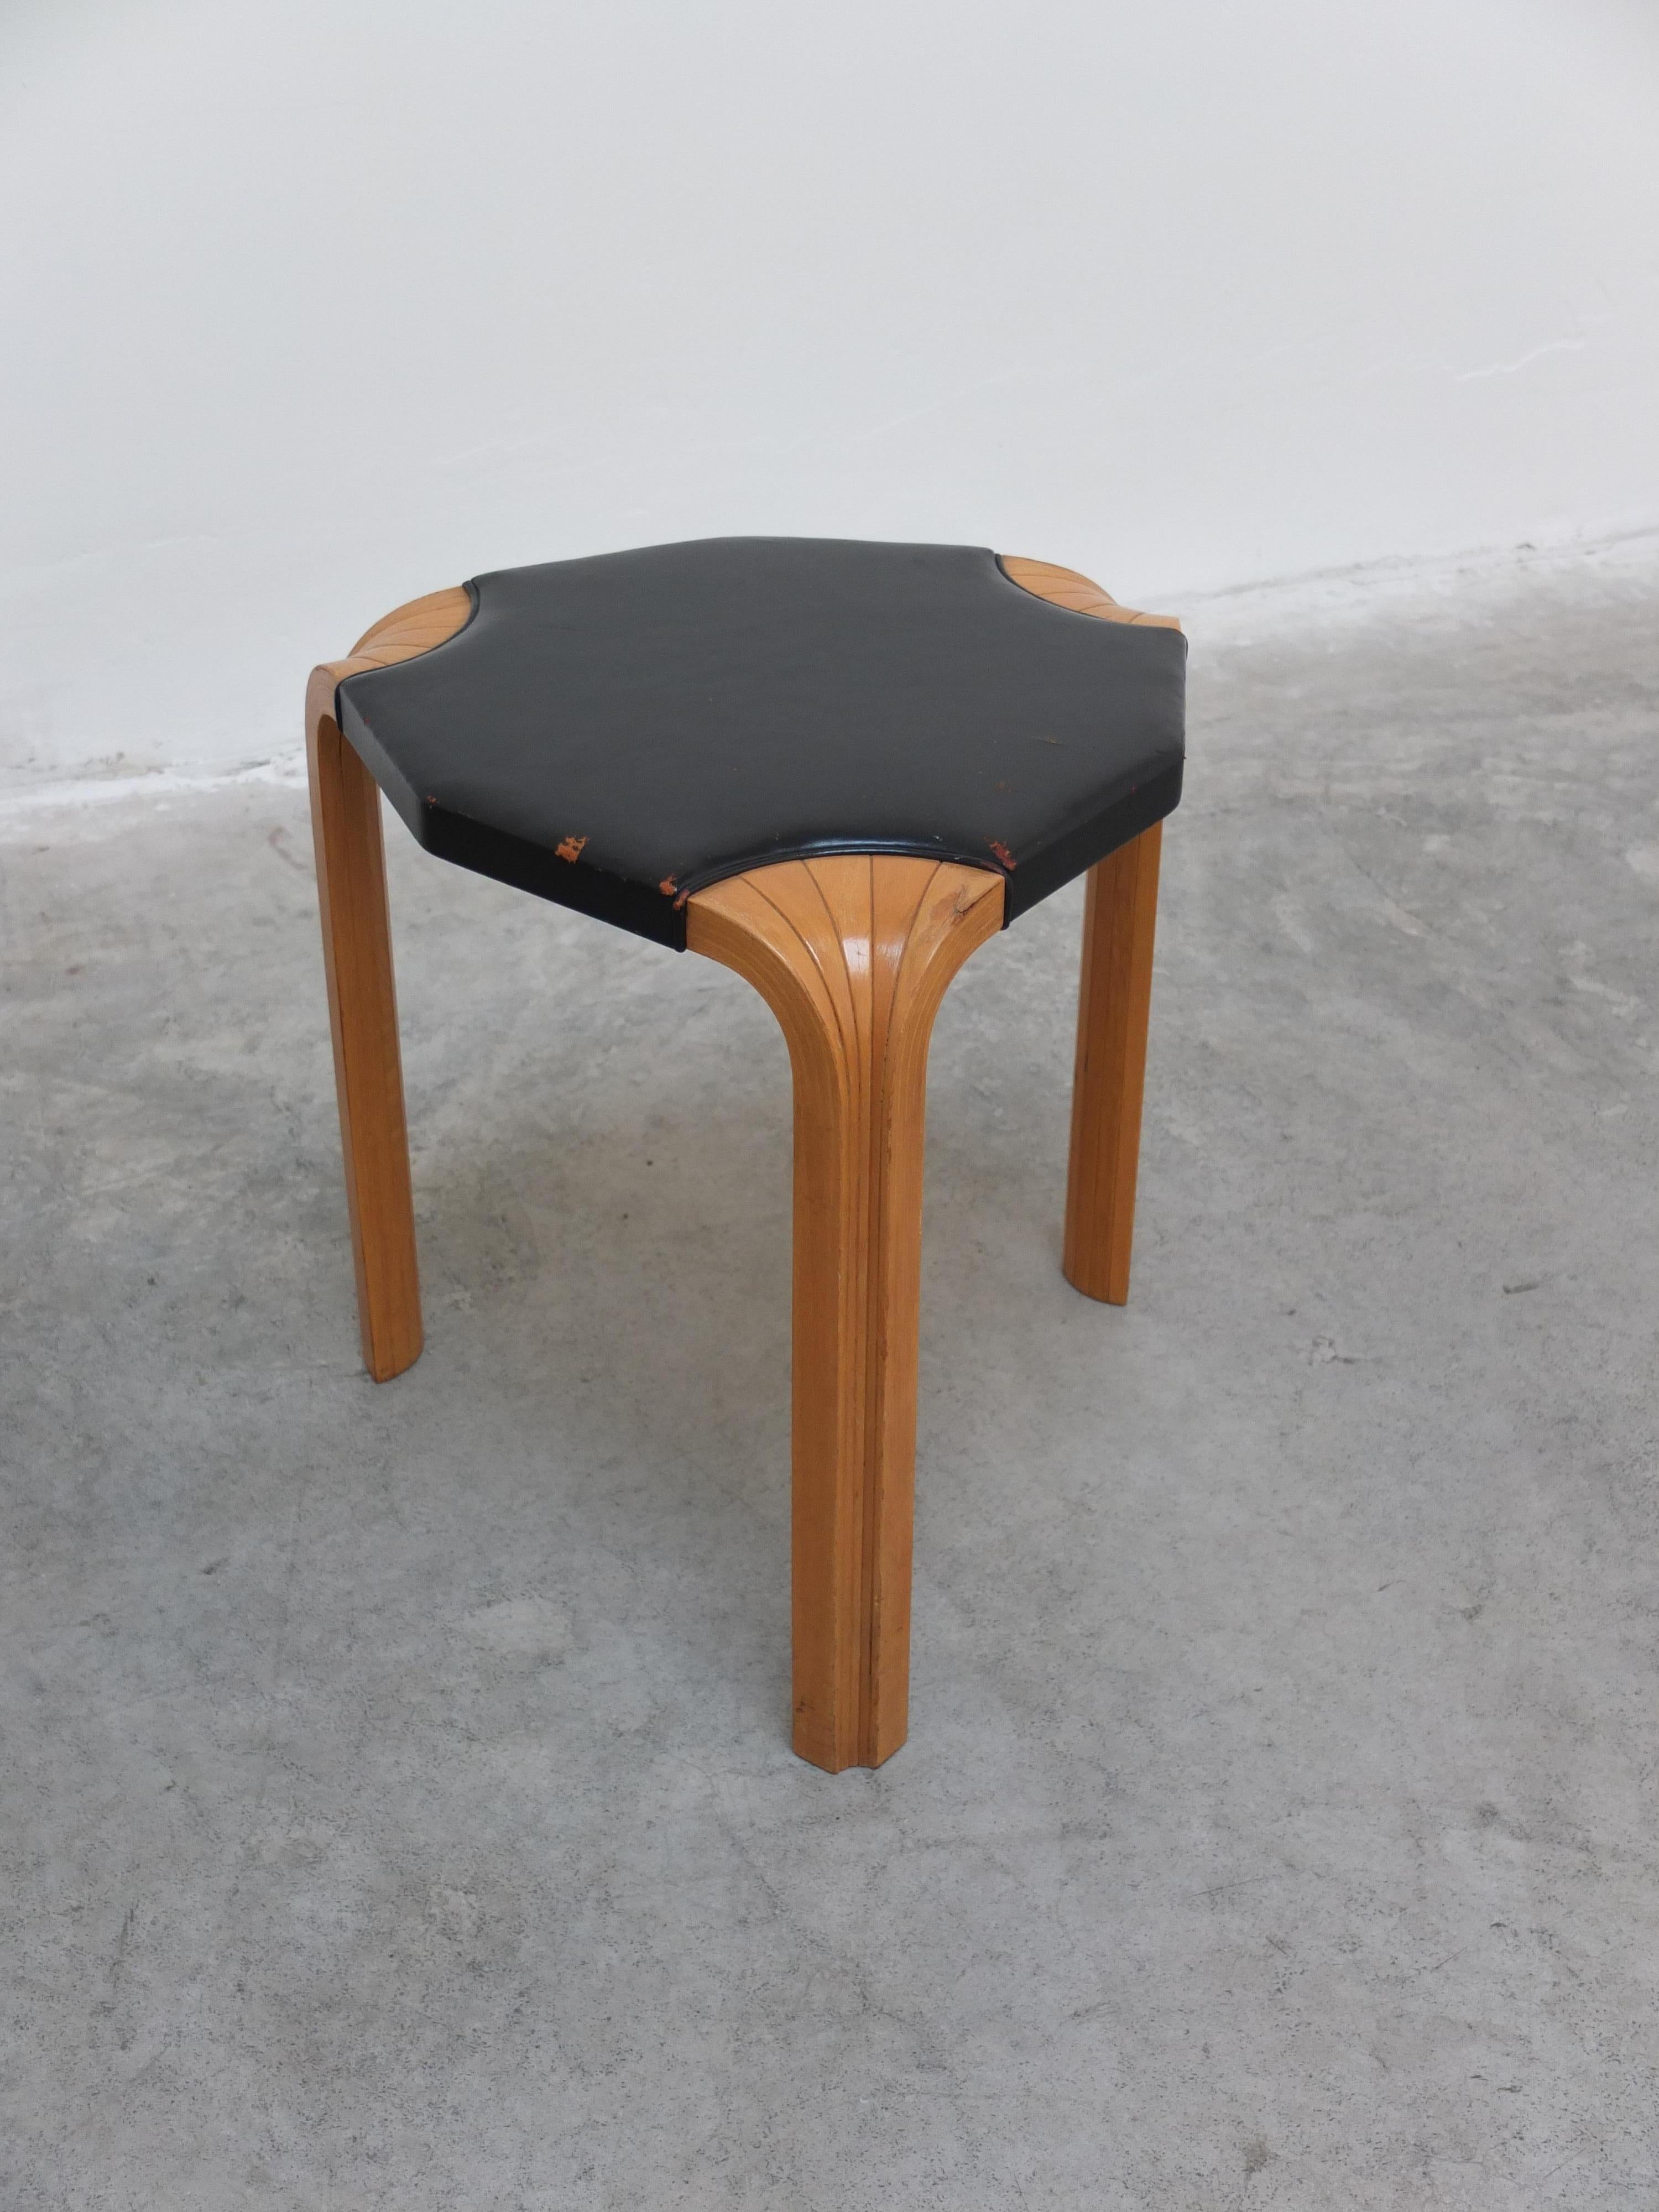 20th Century Important Pair of 'X602' Stools by Alvar Aalto for Artek, 1954 For Sale